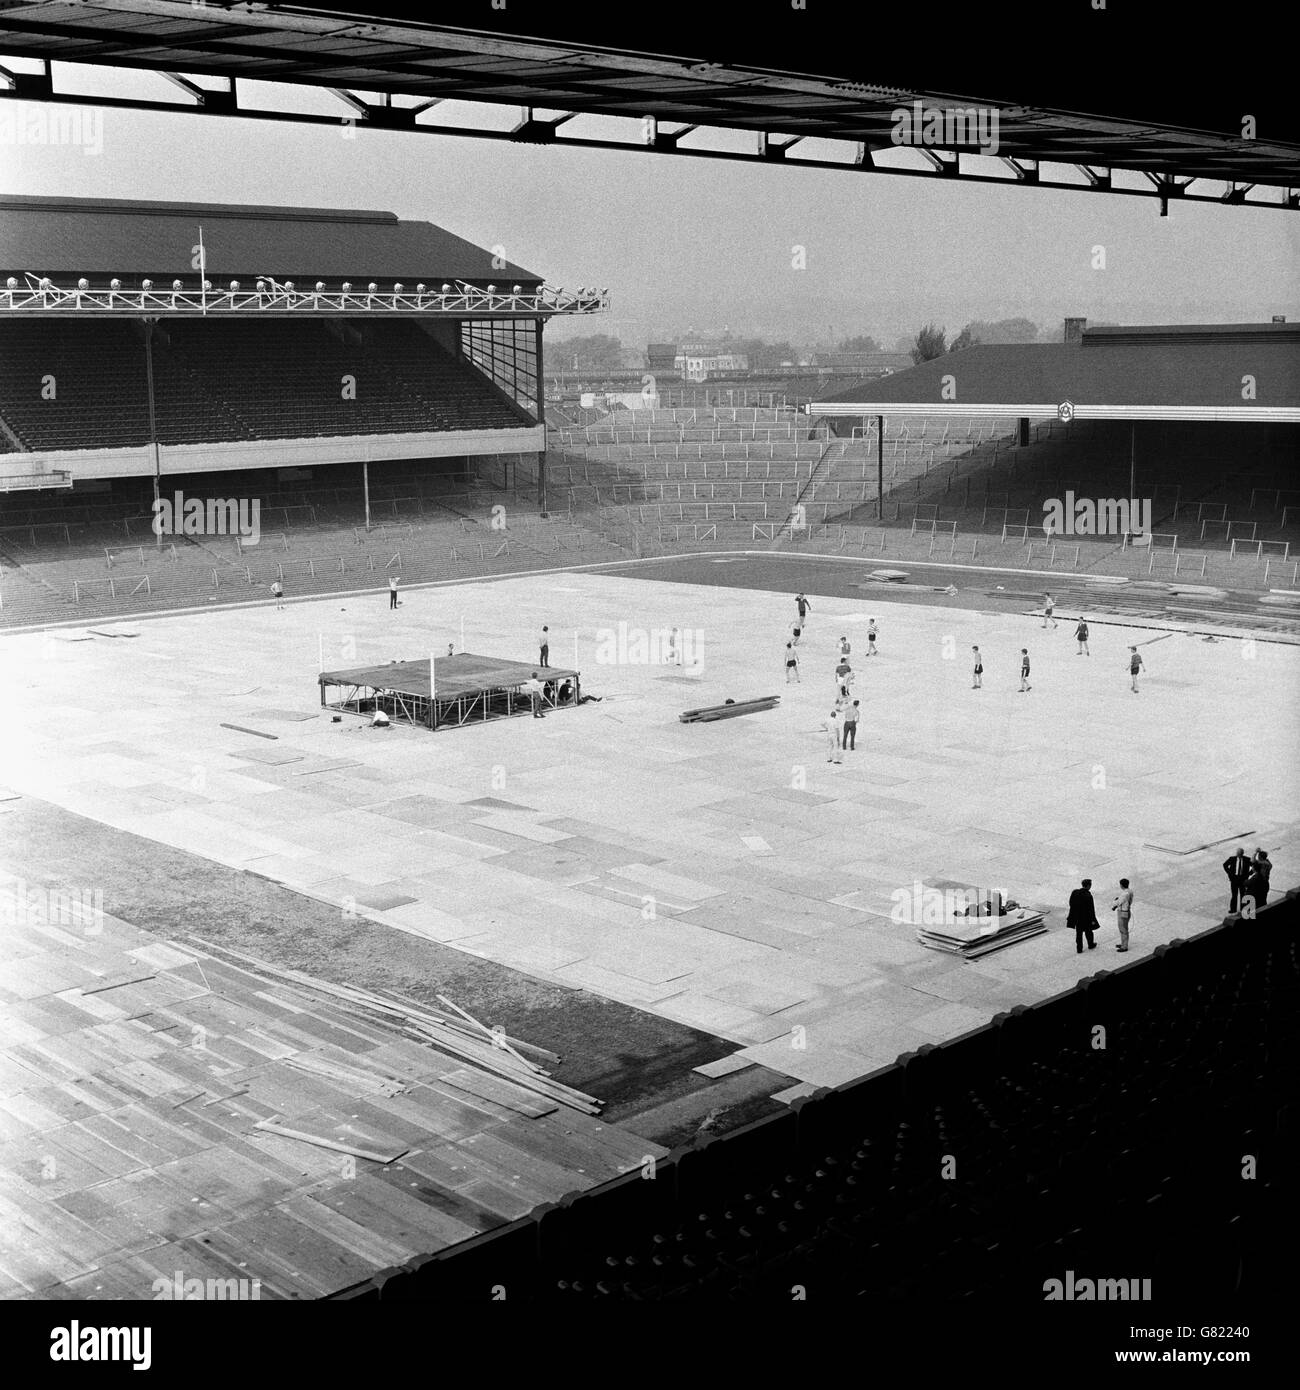 Boxing - World Heavyweight Championship - Muhammad Ali v Henry Cooper - Highbury - Preparations. The ring is erected in the middle of the Highbury pitch while an impromptu kickabout takes place on the covered surface Stock Photo